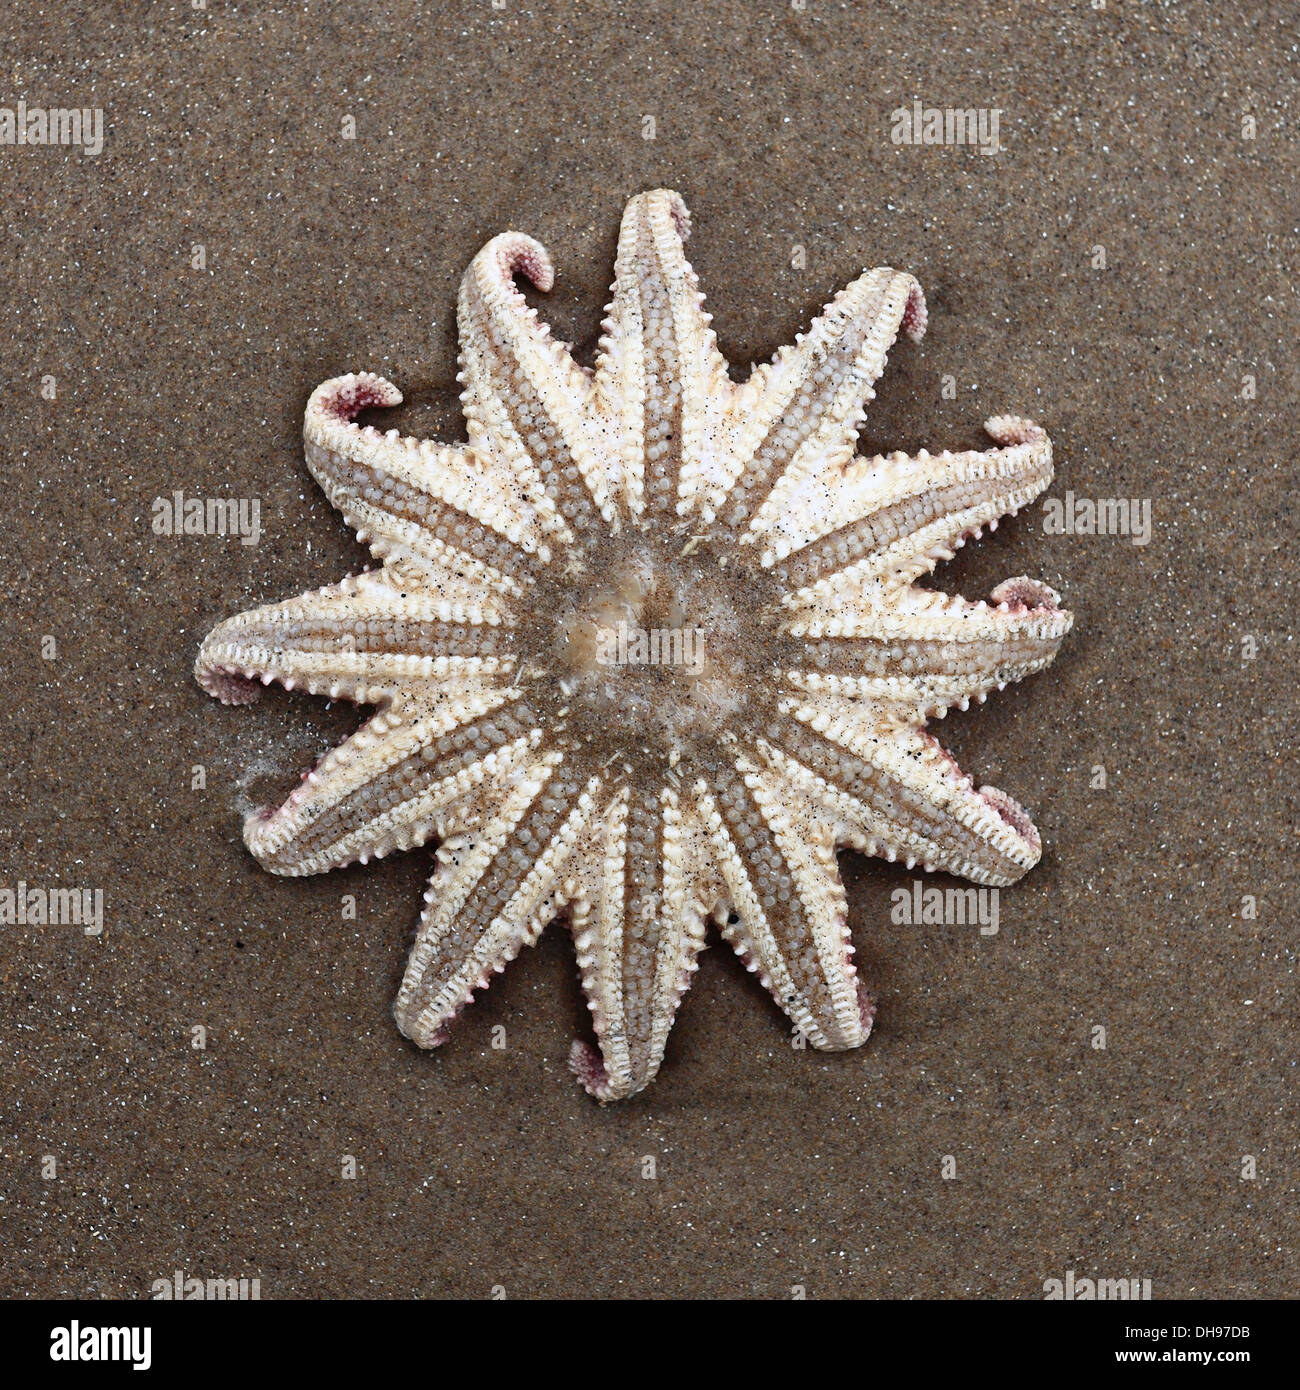 Starfish washed up on the sandy shore. Stock Photo